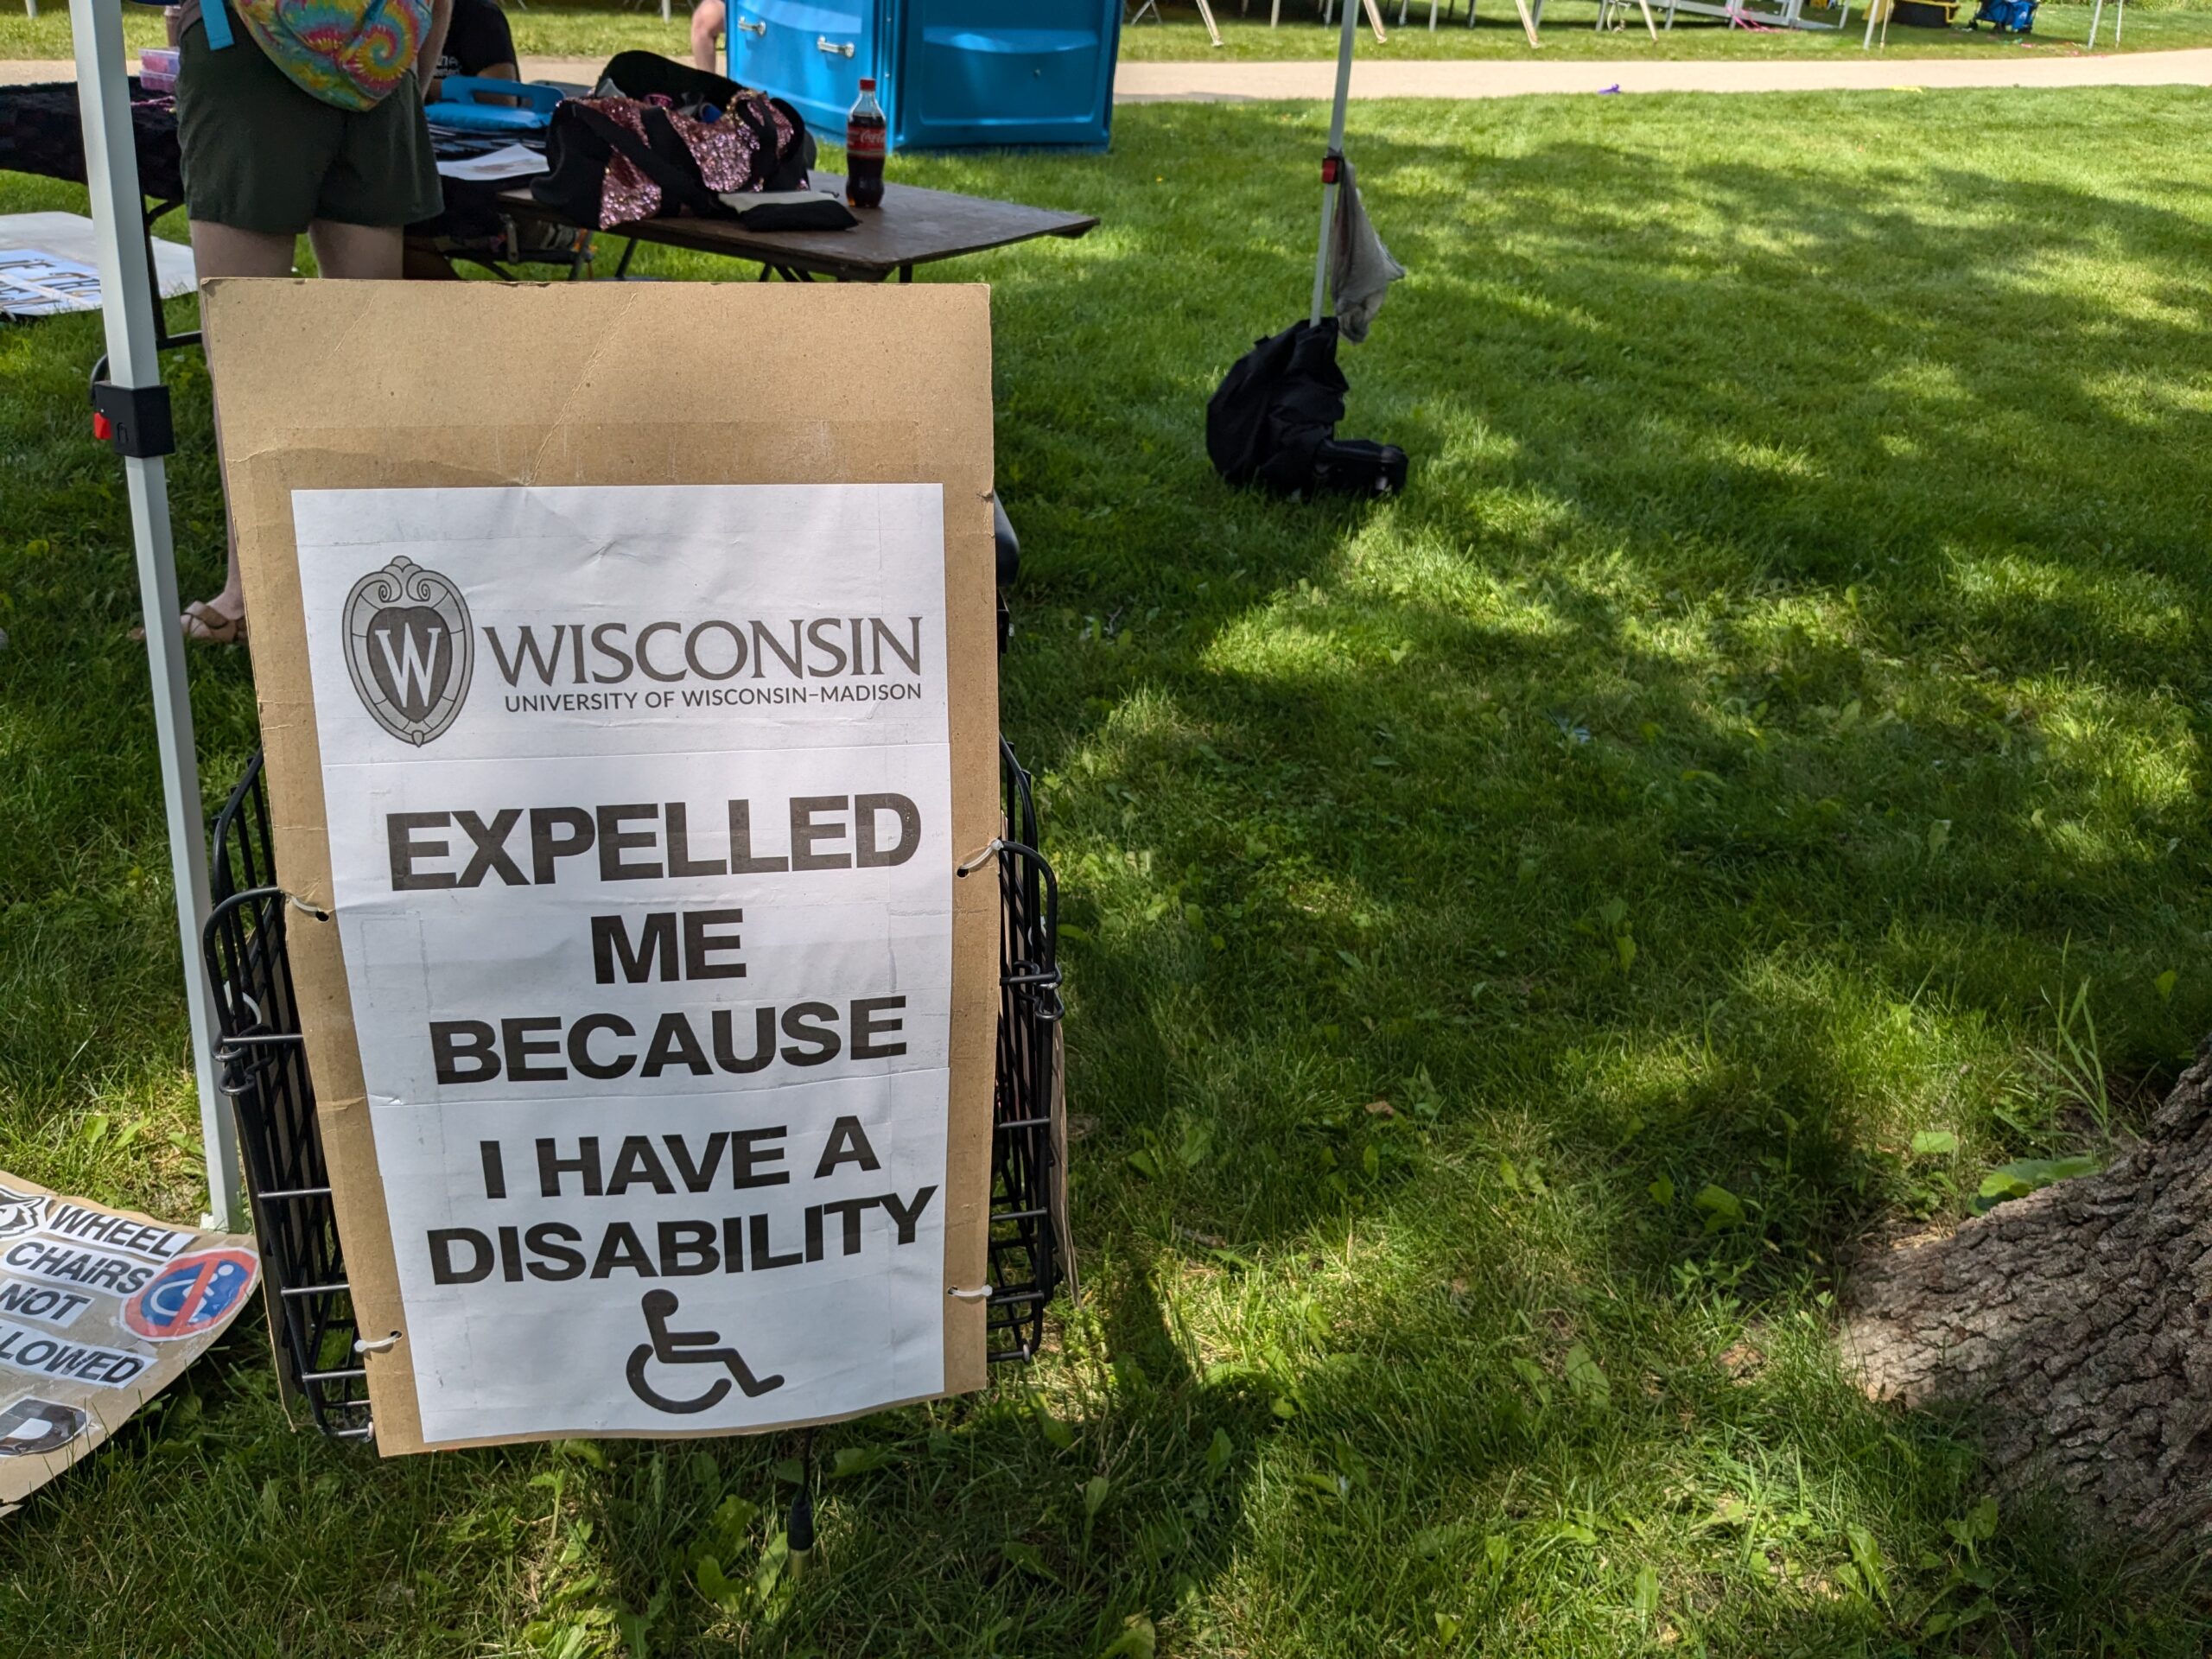 A sign reading "University of Wisconsin-Madison expelled me because I have a disability" with a wheelchair icon at the bottom